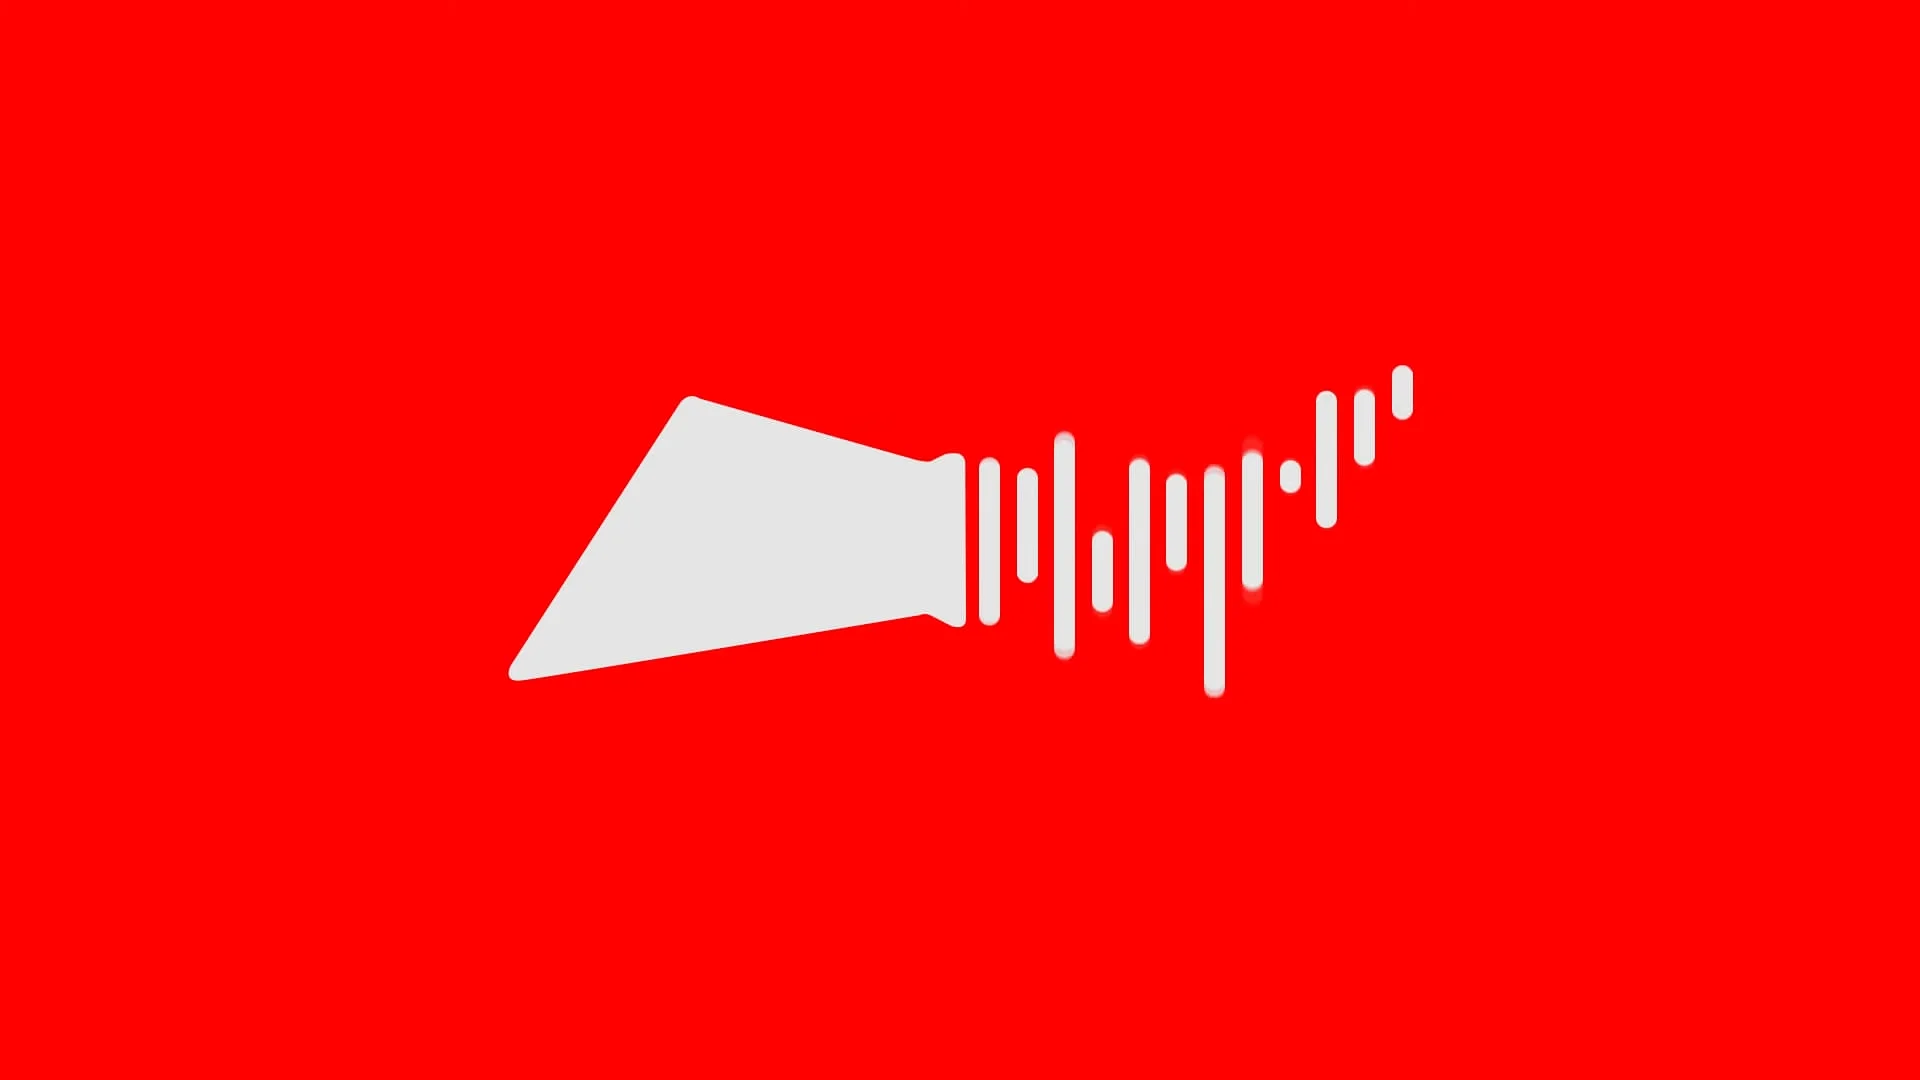 White megaphone icon with sound waves on red background